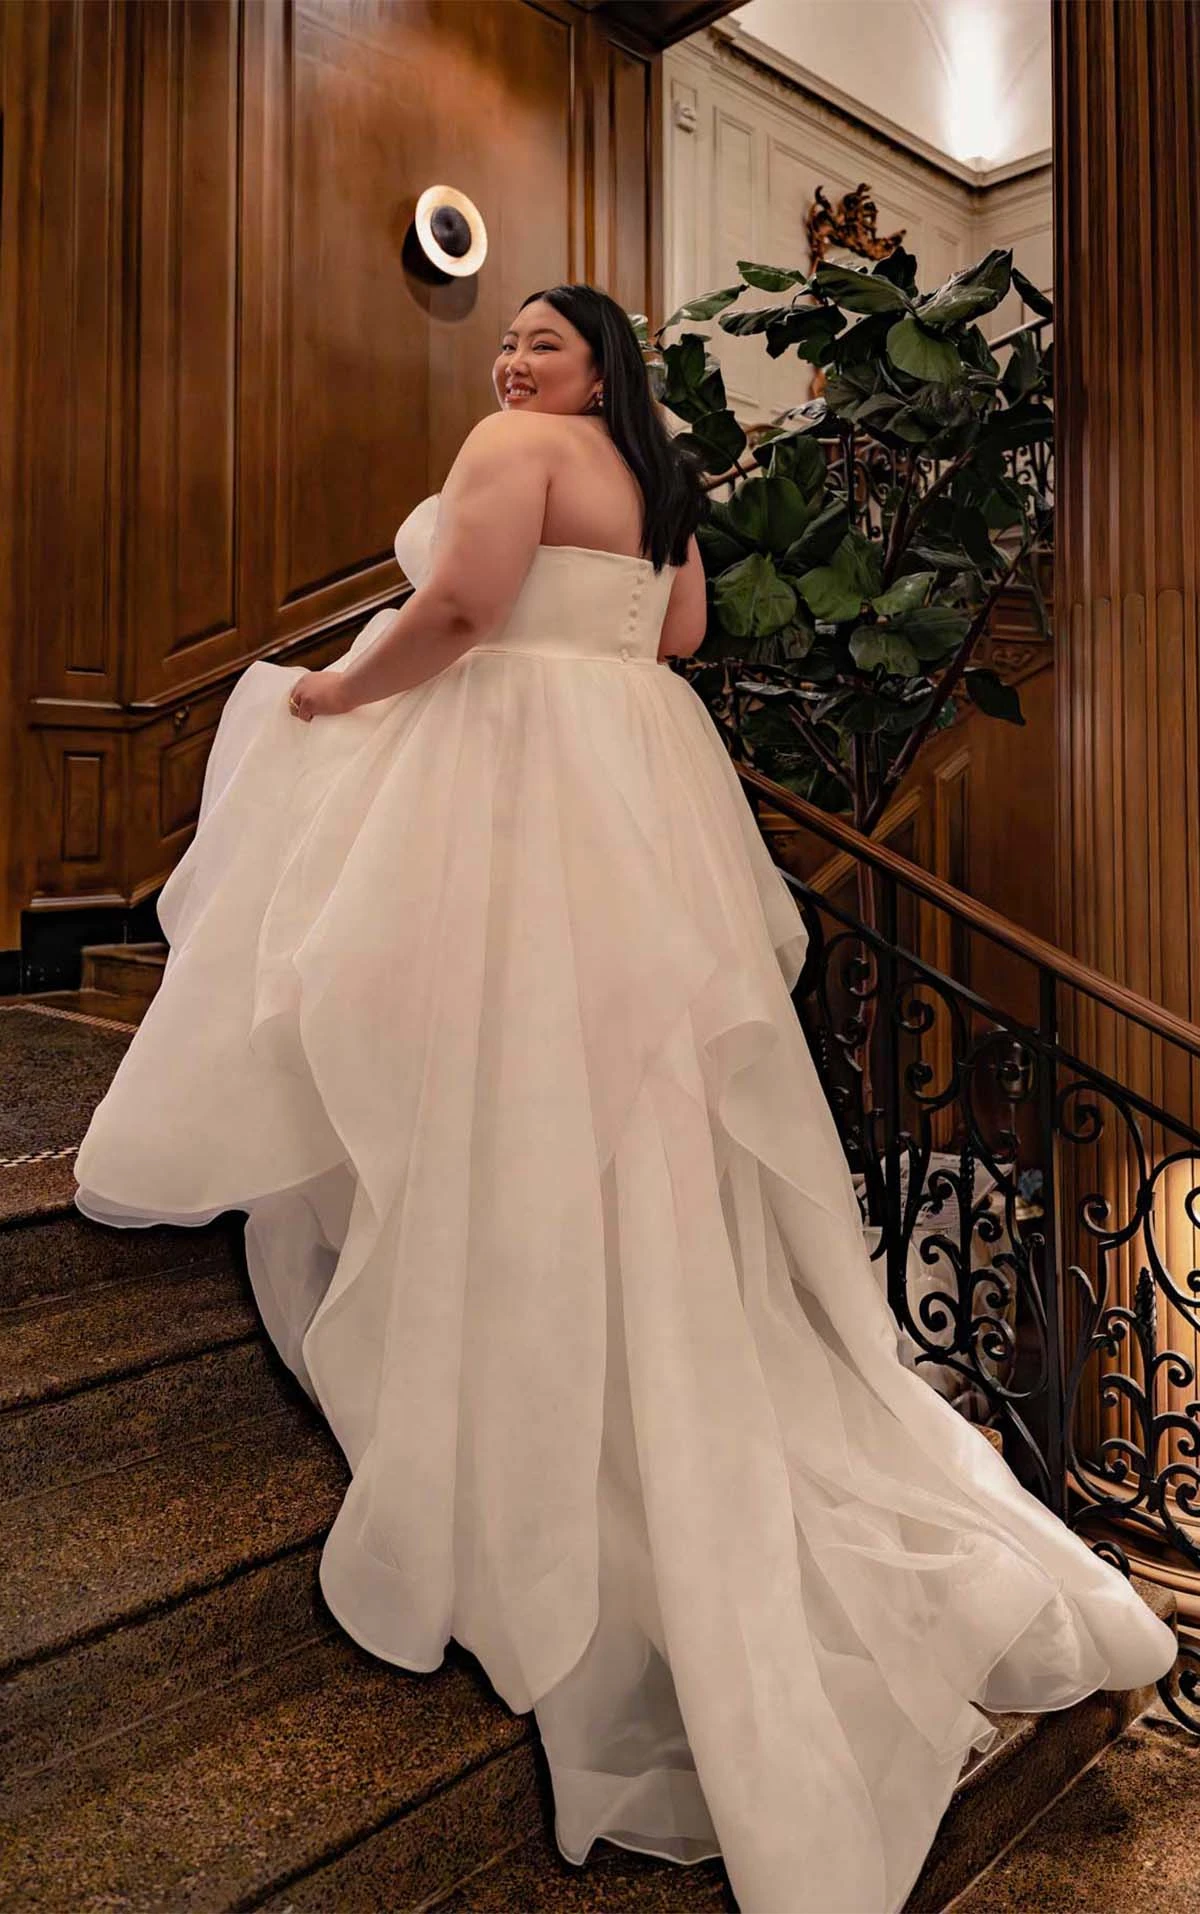 plus size ballgown wedding dress with layered skirt and detachable bow belt - 7729+ by Stella York